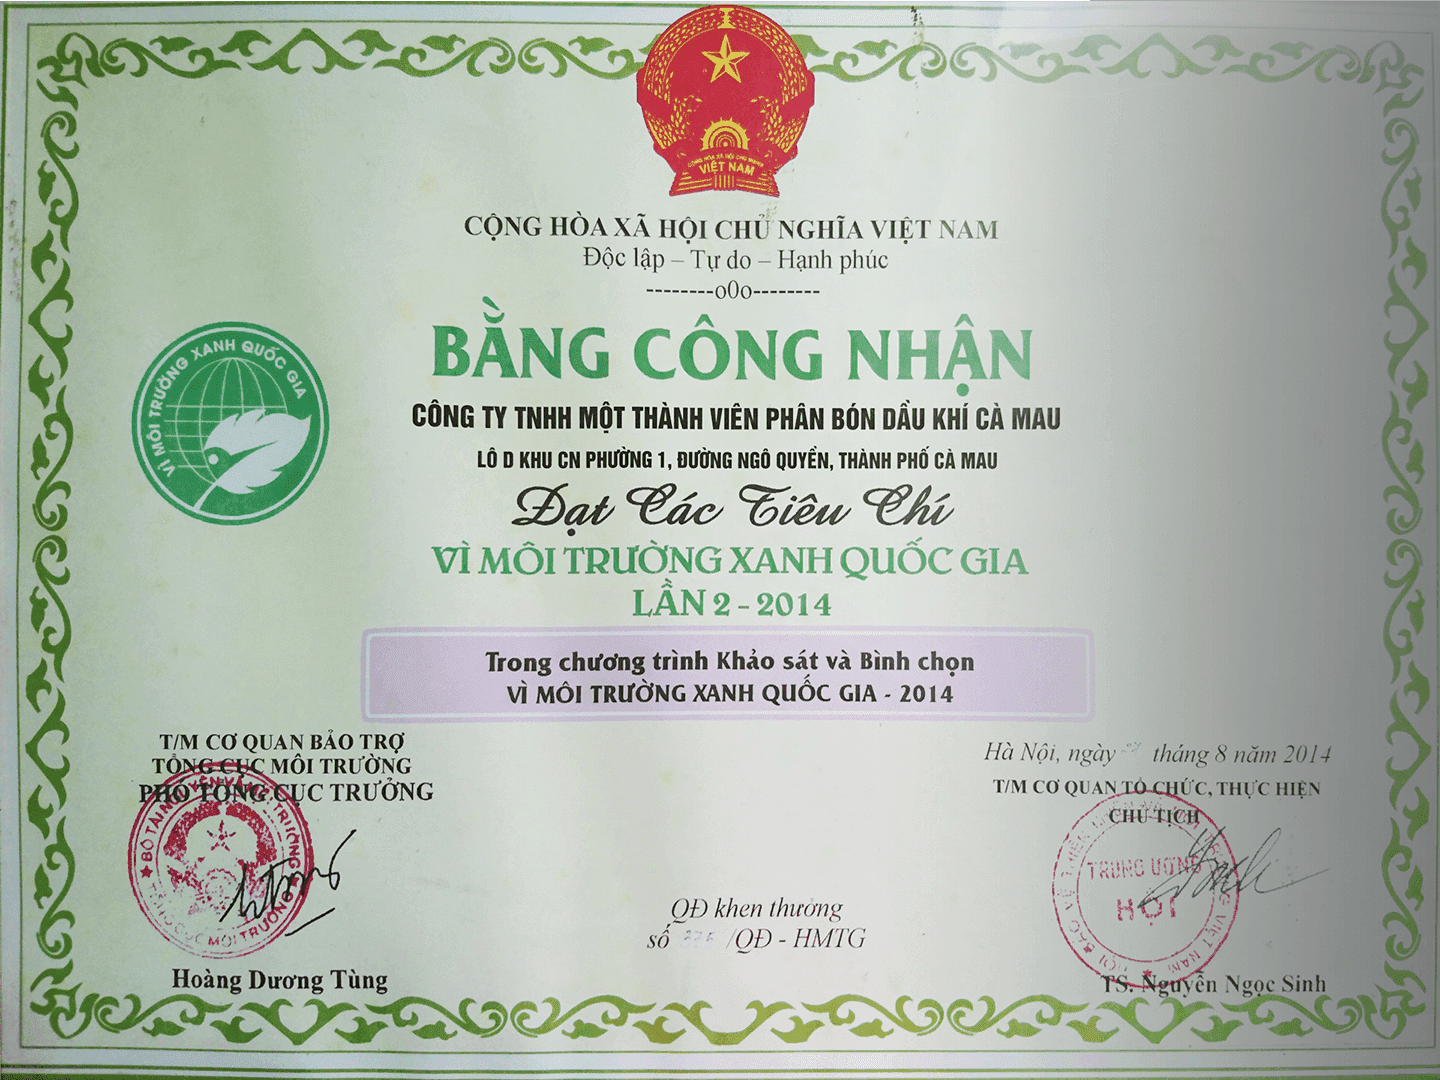 Certificate of "For the National Green Environment" 2nd time in 2014